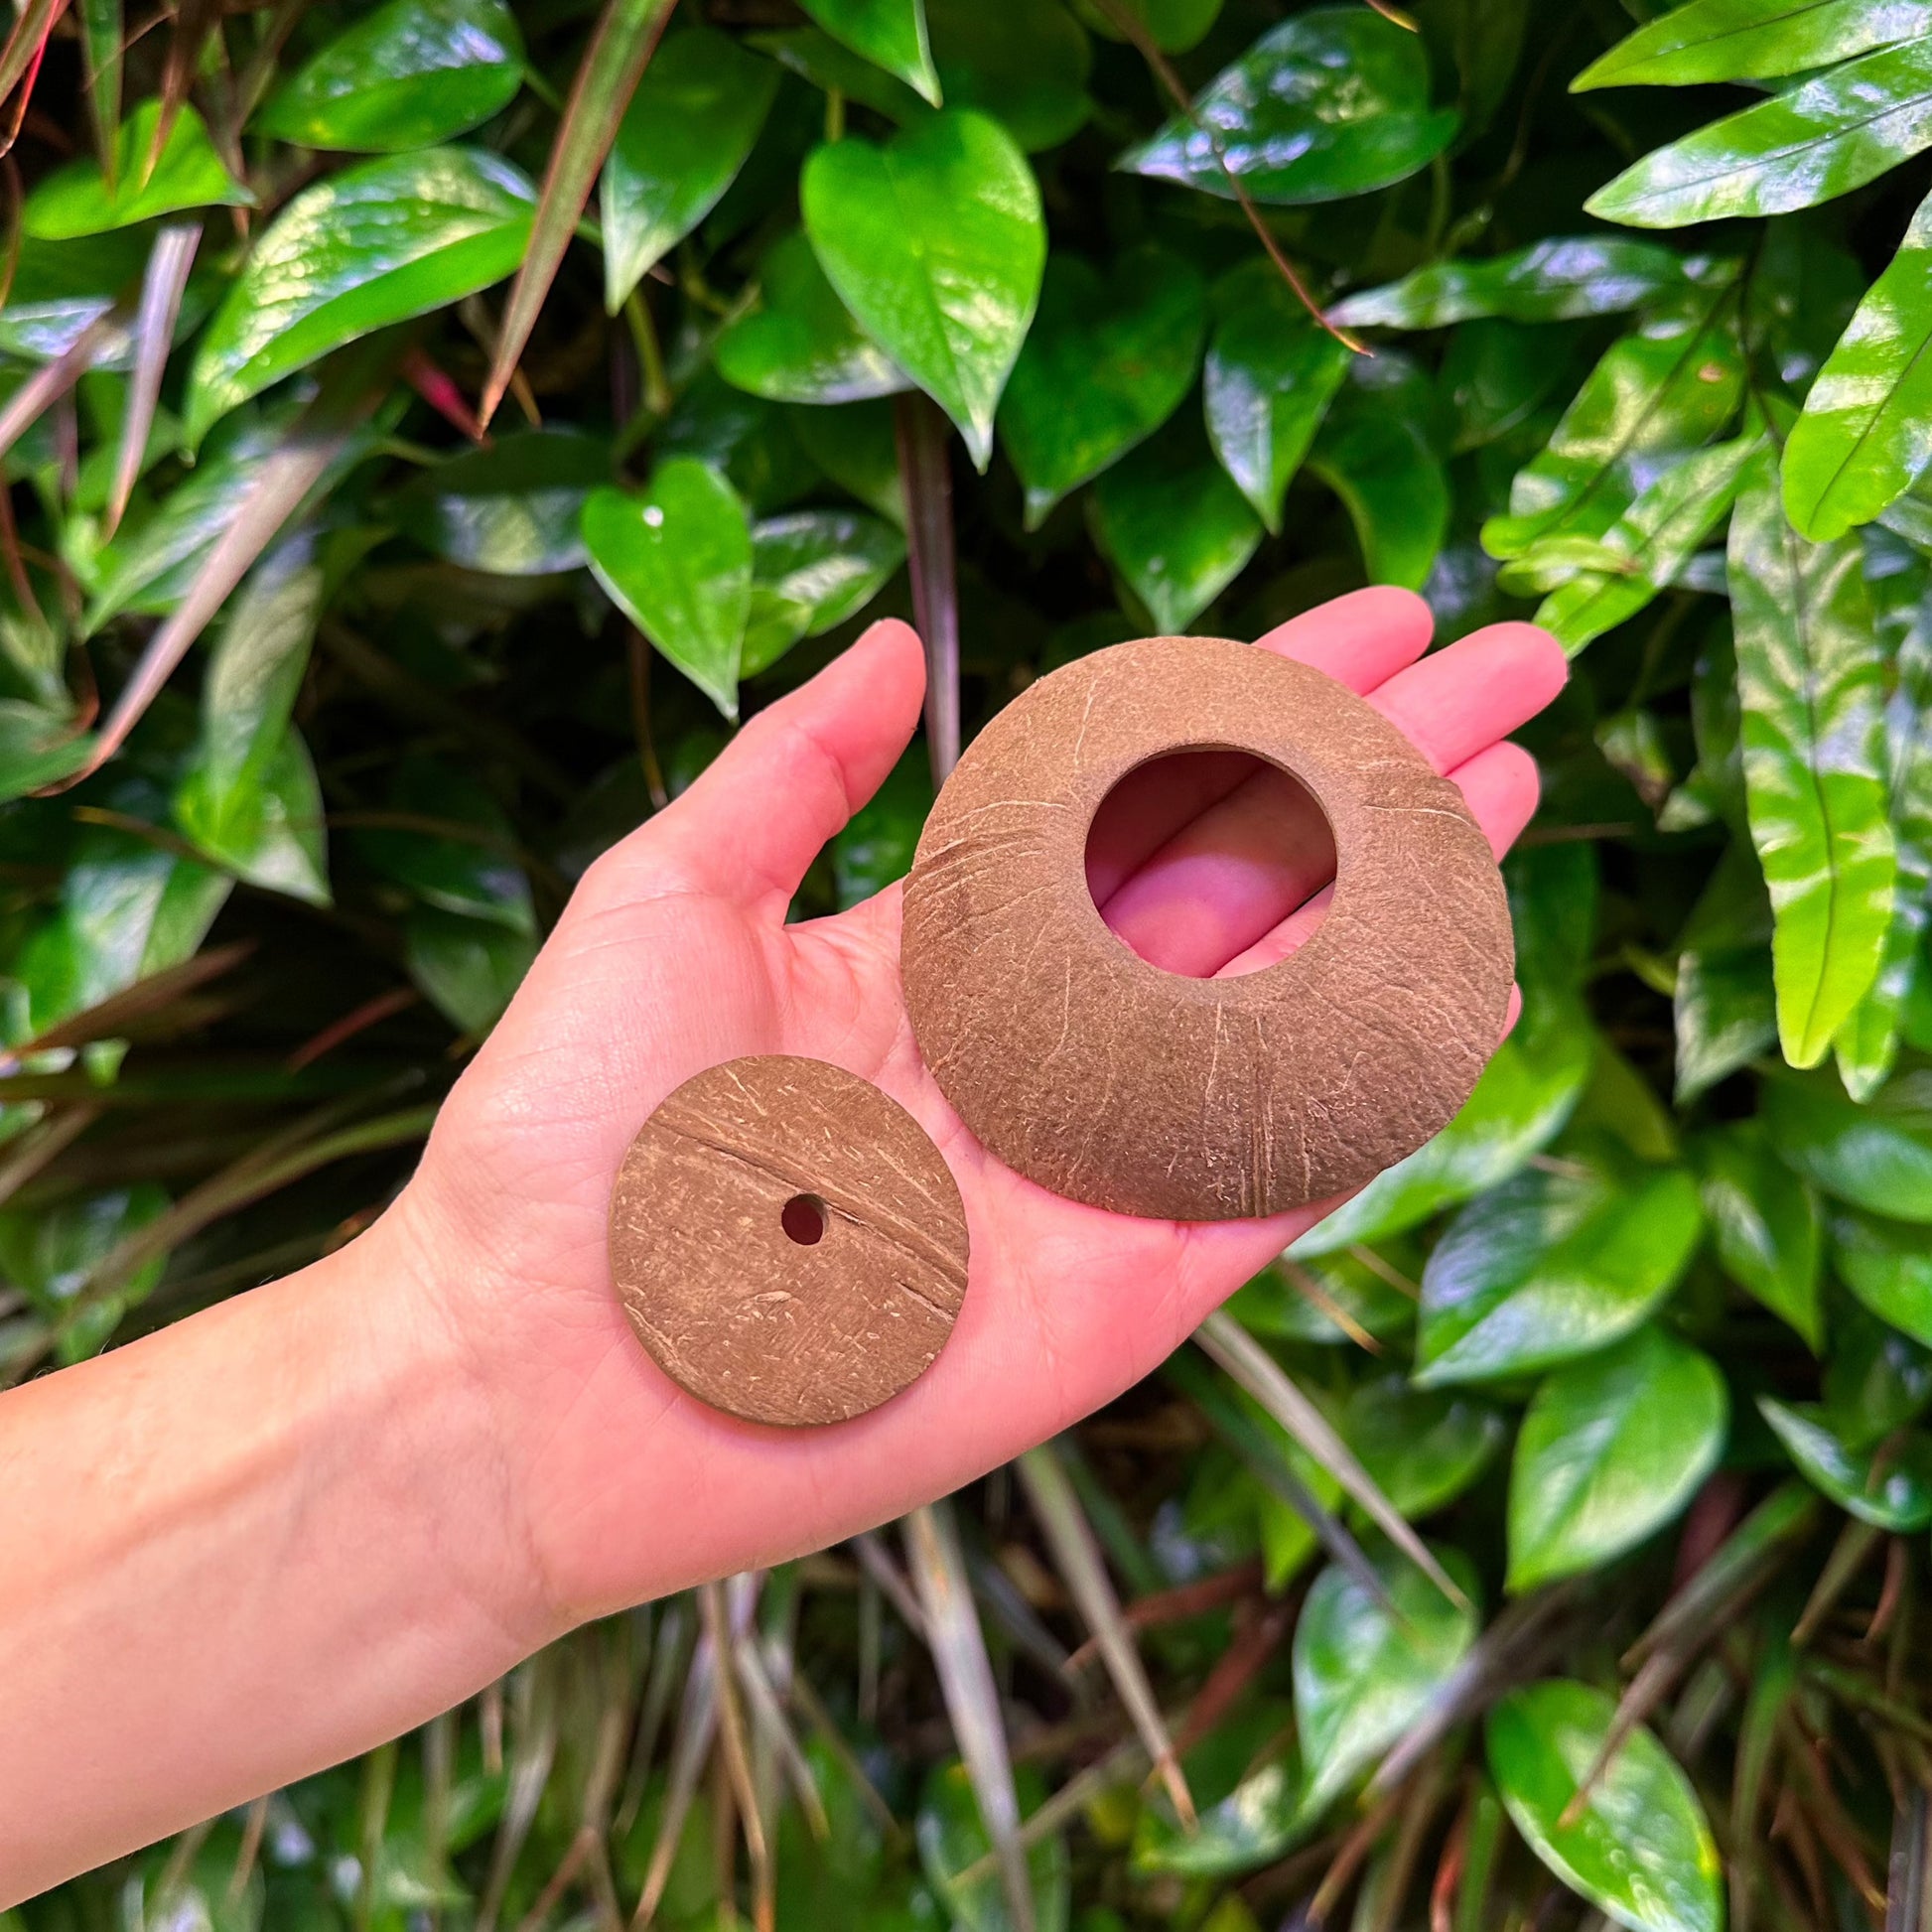 large and small coconut shell disks